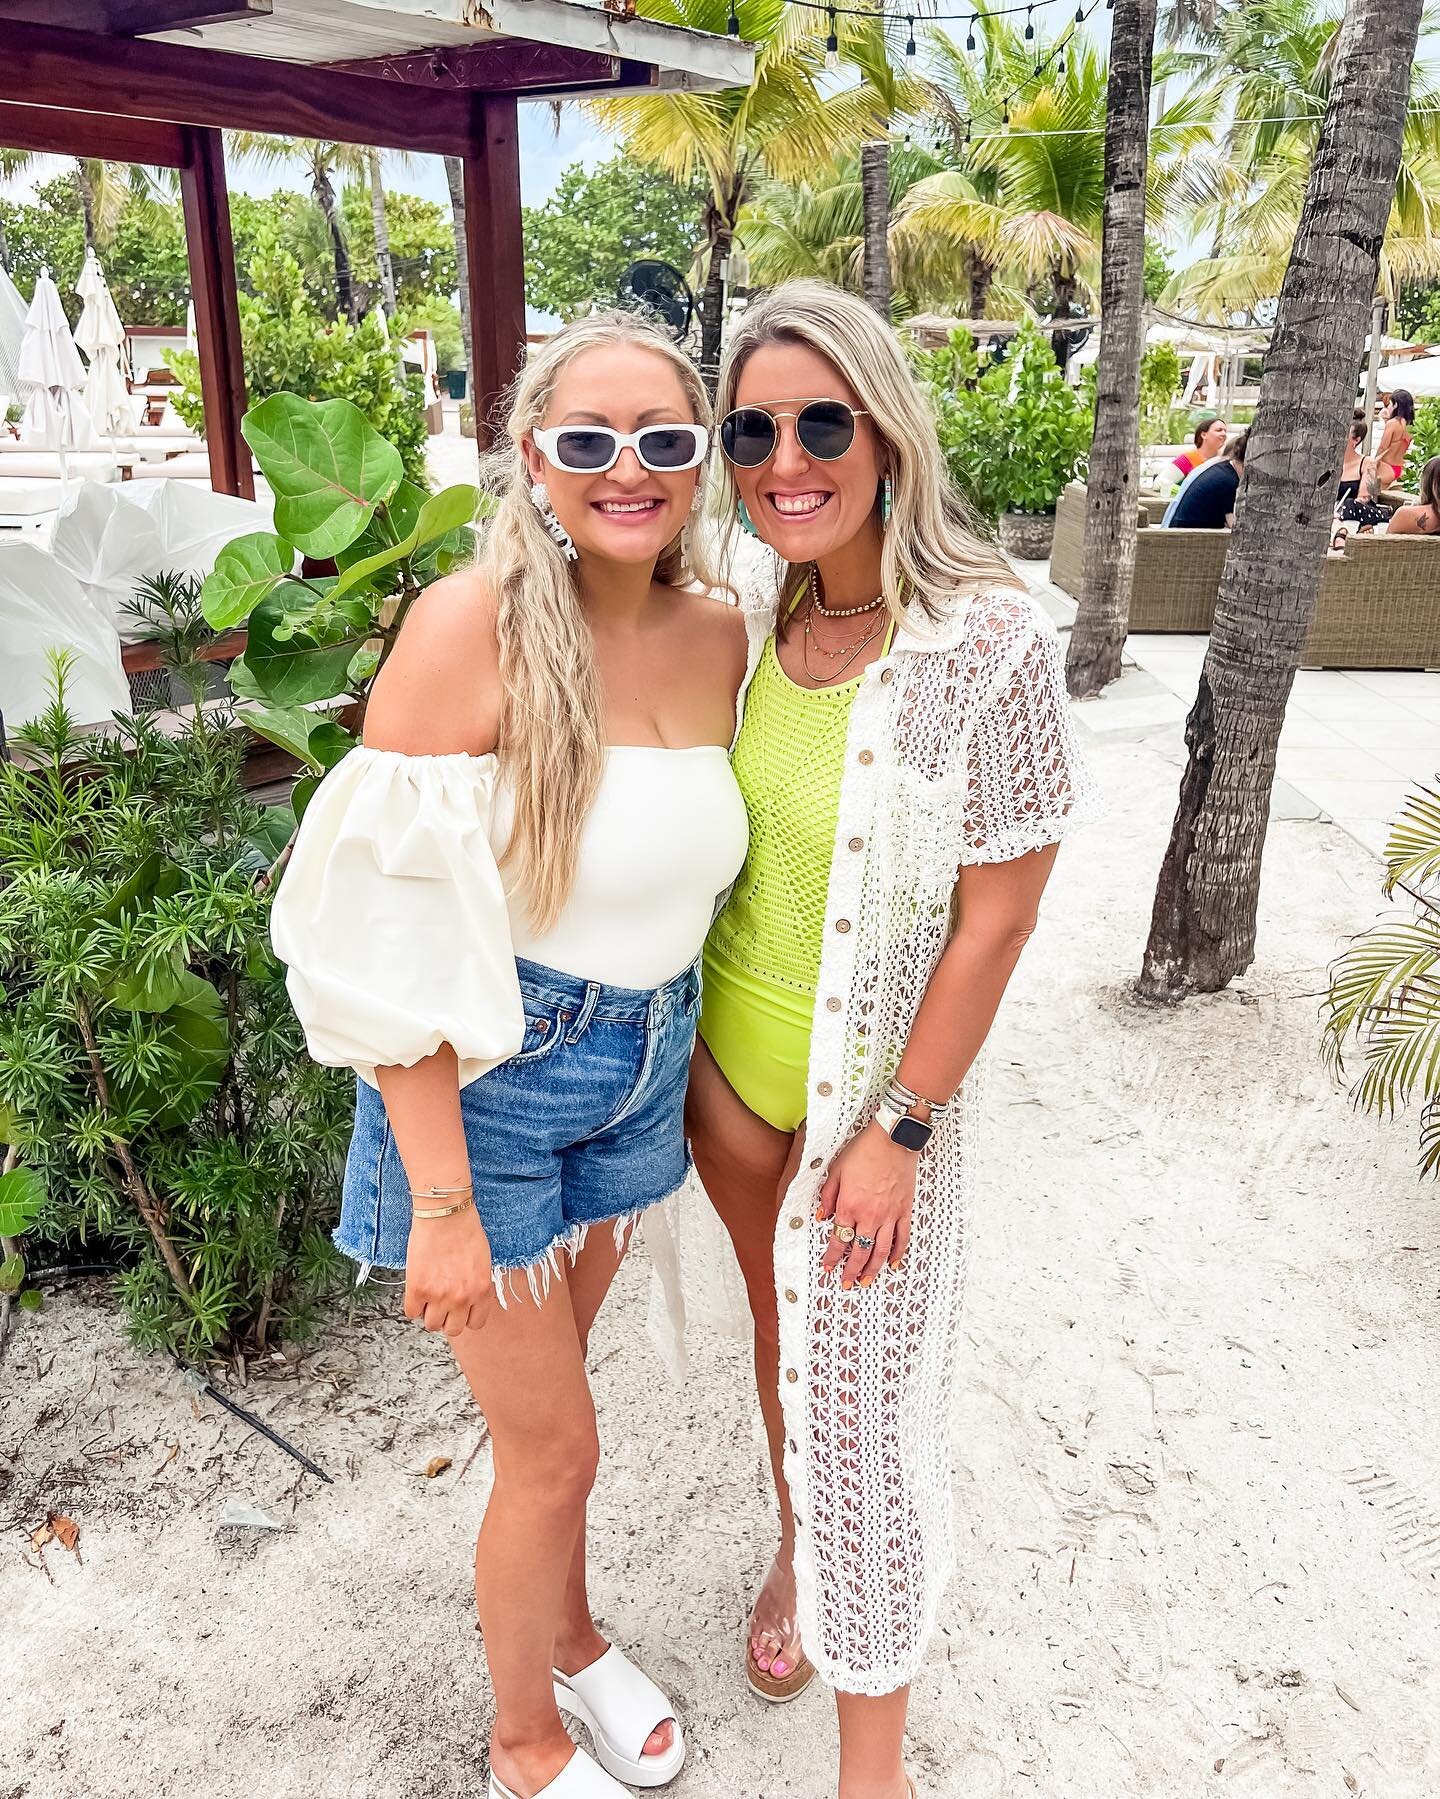 we&rsquo;re in miami bach 🩵🥂💚🪩💋🩷🤩
.
the best bachelorette weekend celebrating @abiglisson only 54 days til you&rsquo;re finally a FREEMAN 🥳 i love you &amp; cant wait til the big day!!
.
.
.
#miamibachelorette #neonnights #miami #southbeach #